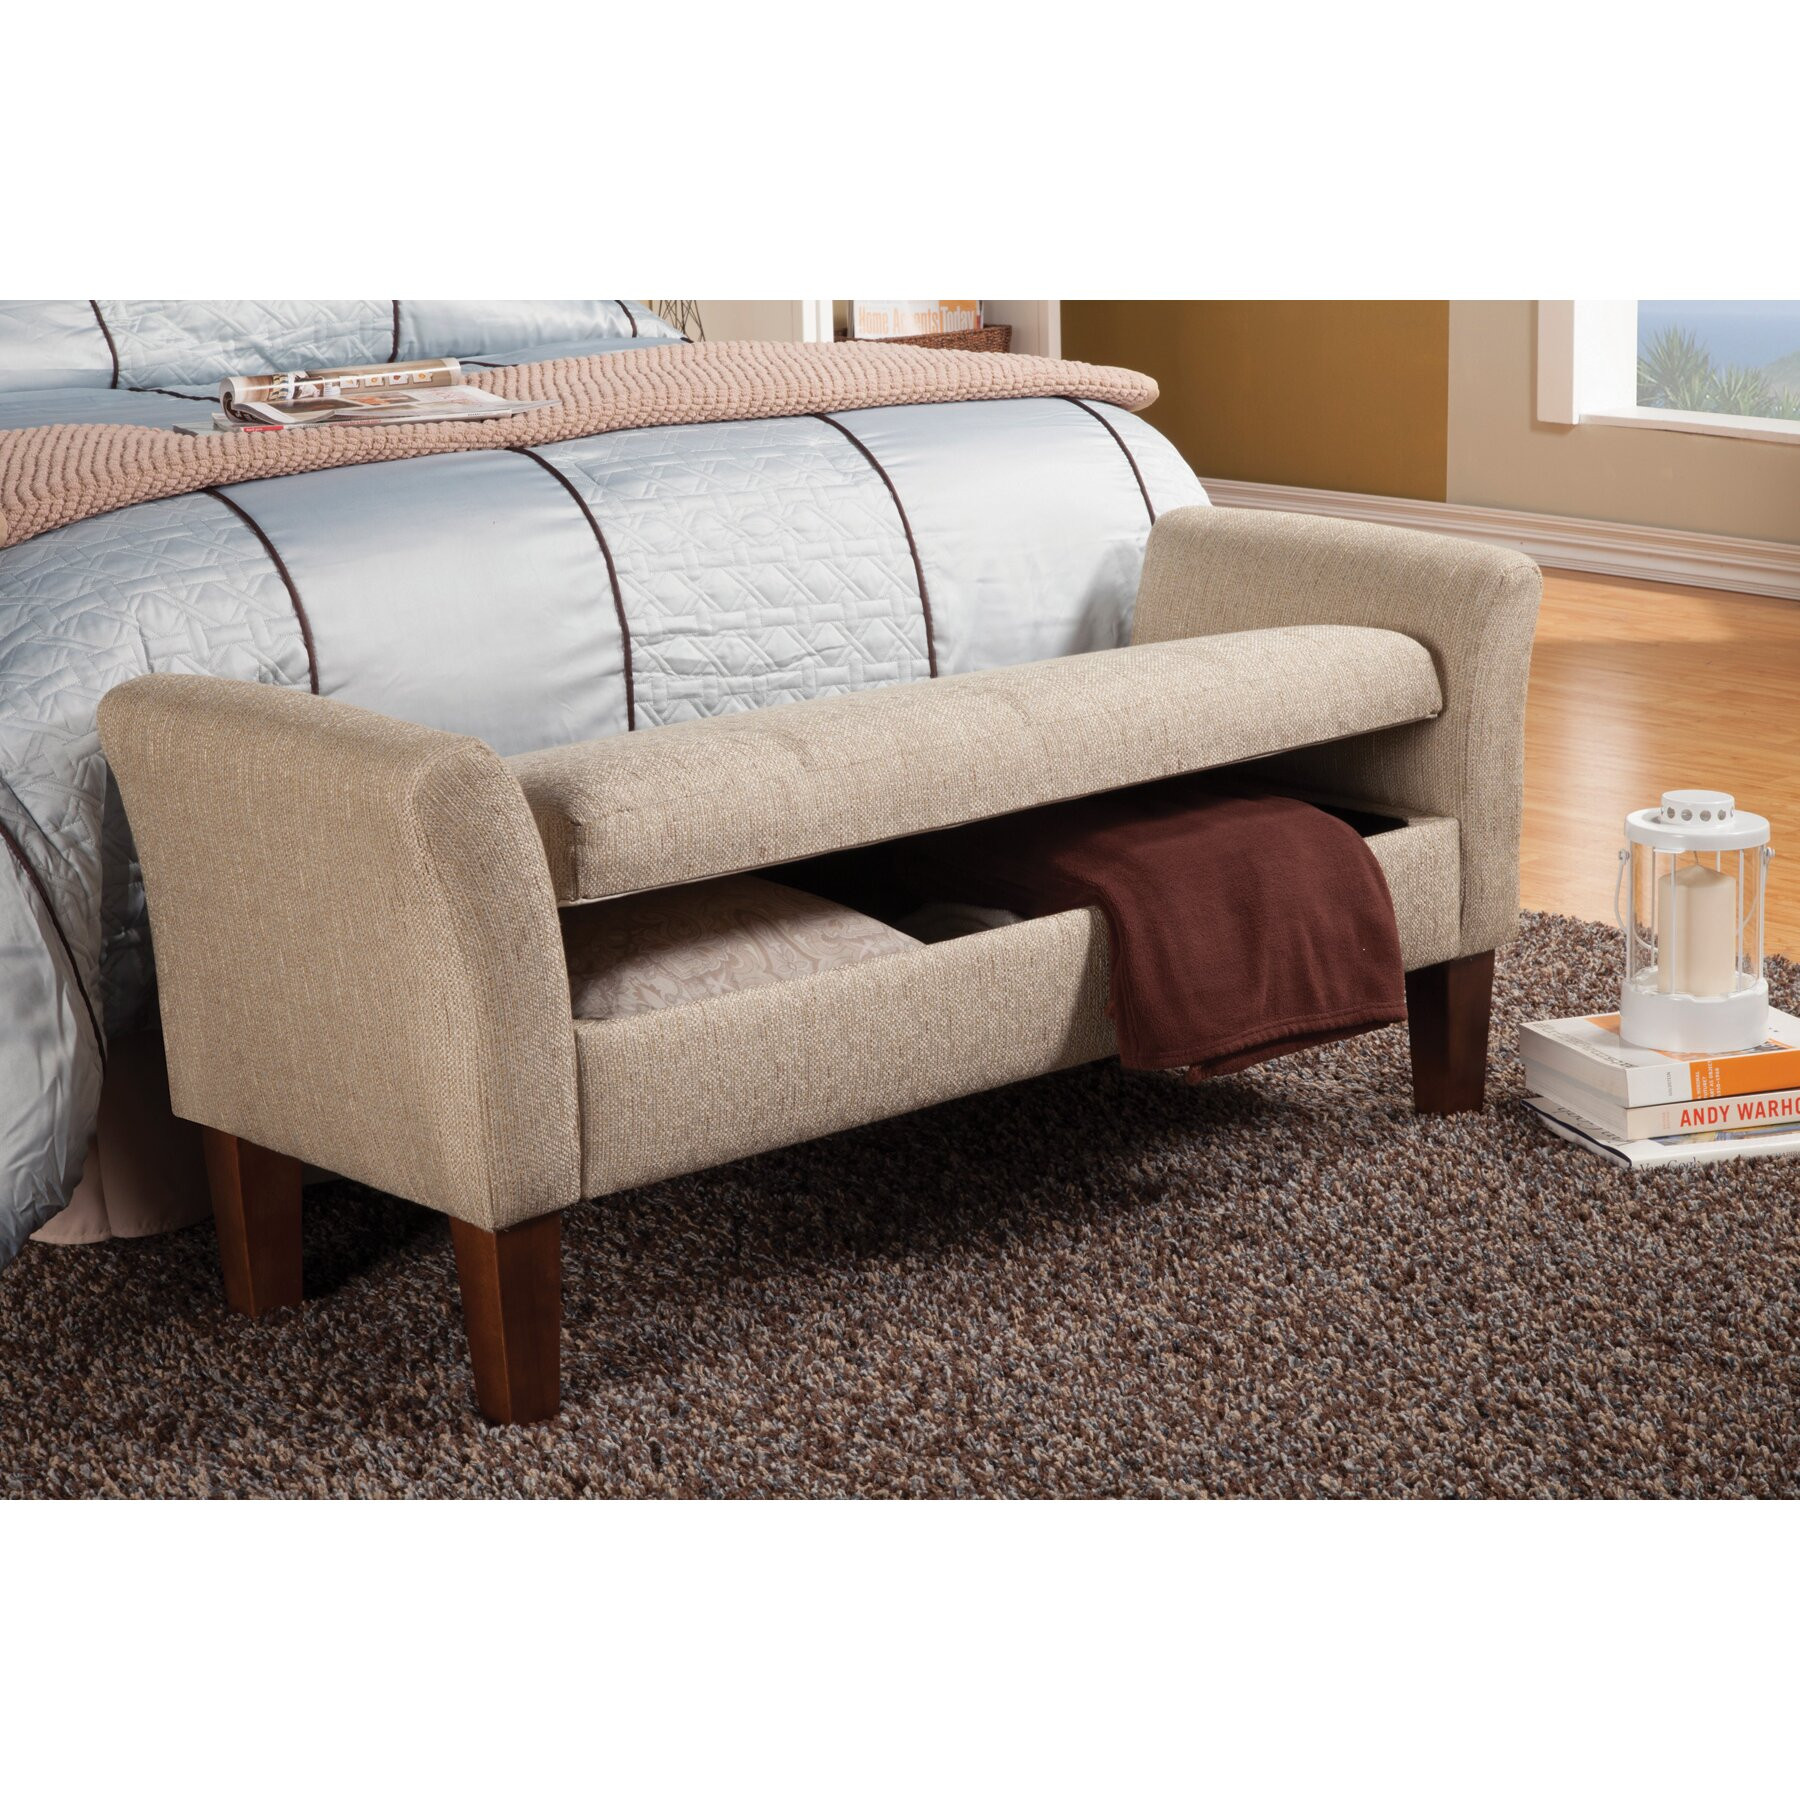 Bedroom Storage Benches
 Wildon Home Upholstered Storage Bedroom Bench & Reviews